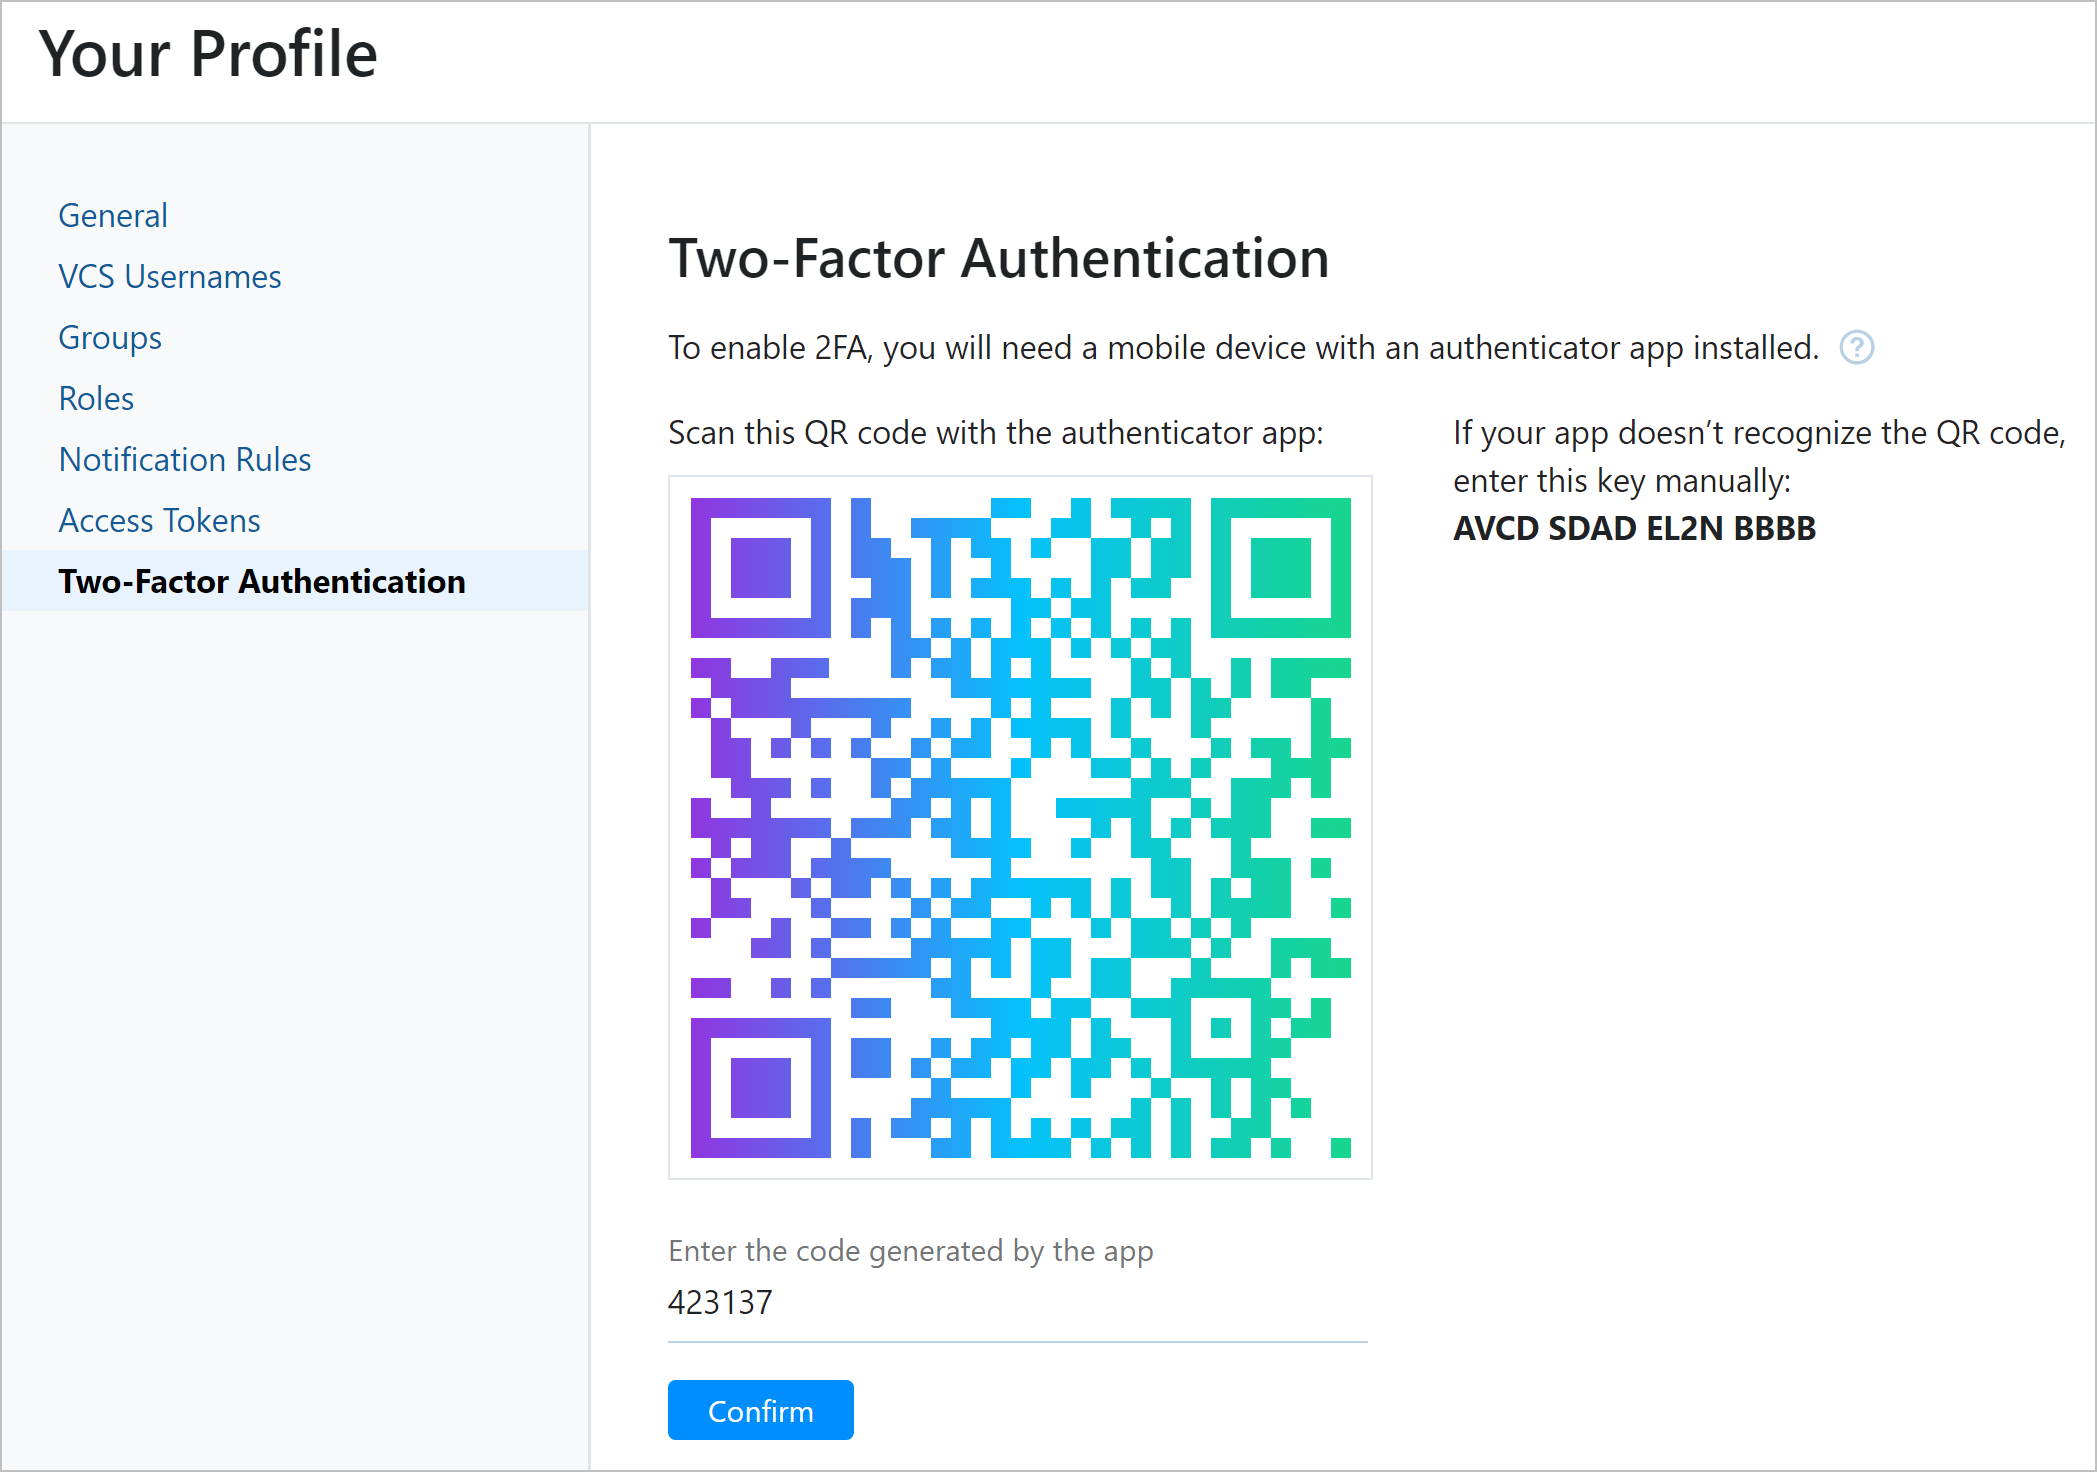 Configuring two-factor authentication